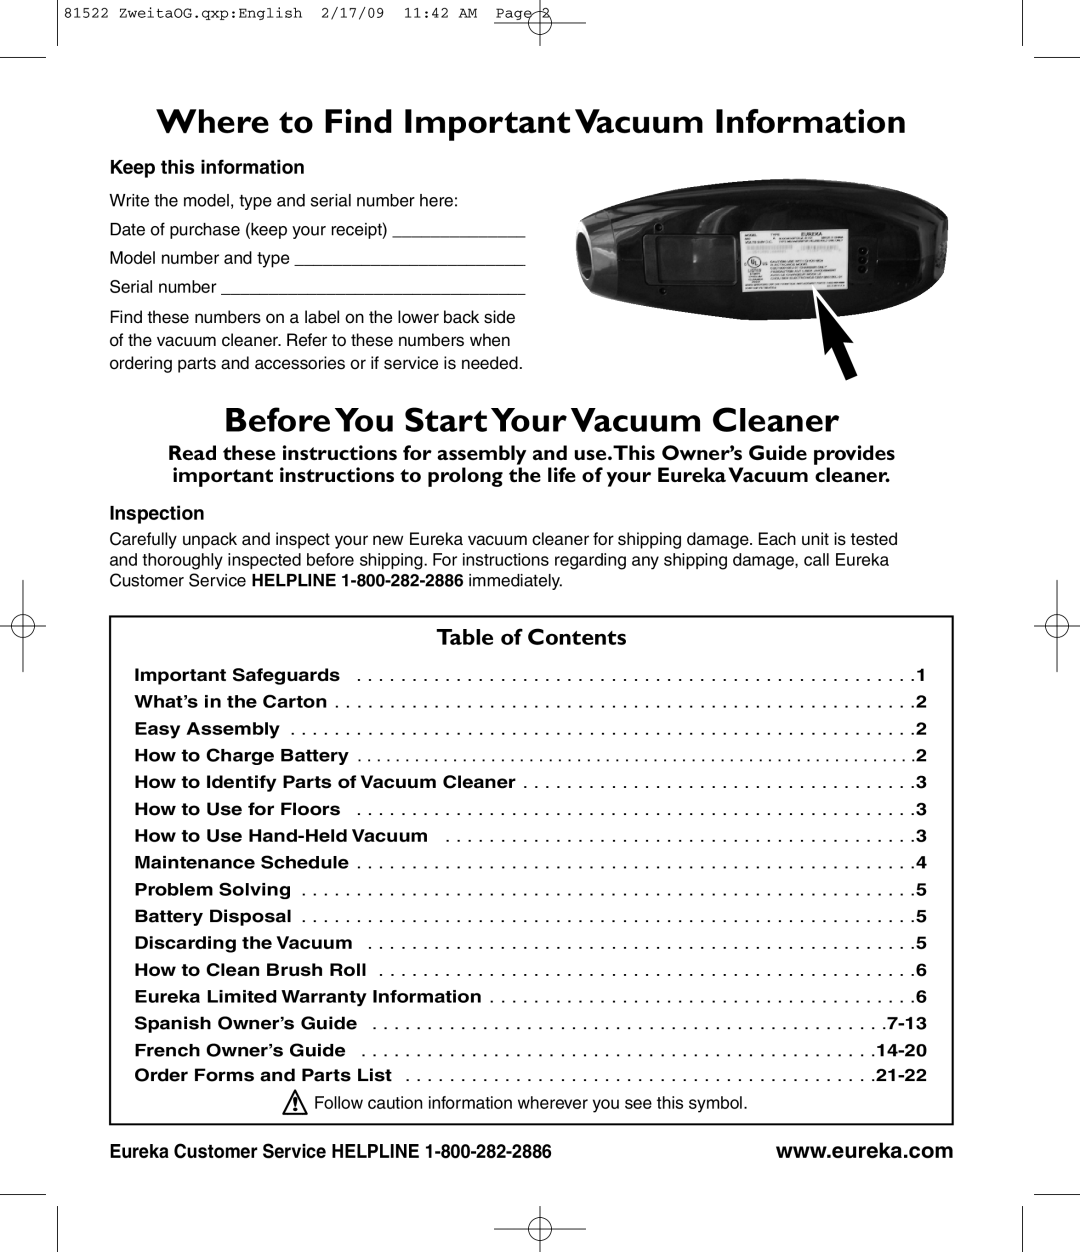 Eureka 580 Where to Find Important Vacuum Information, BeforeYou Start YourVacuum Cleaner, Table of Contents, Inspection 